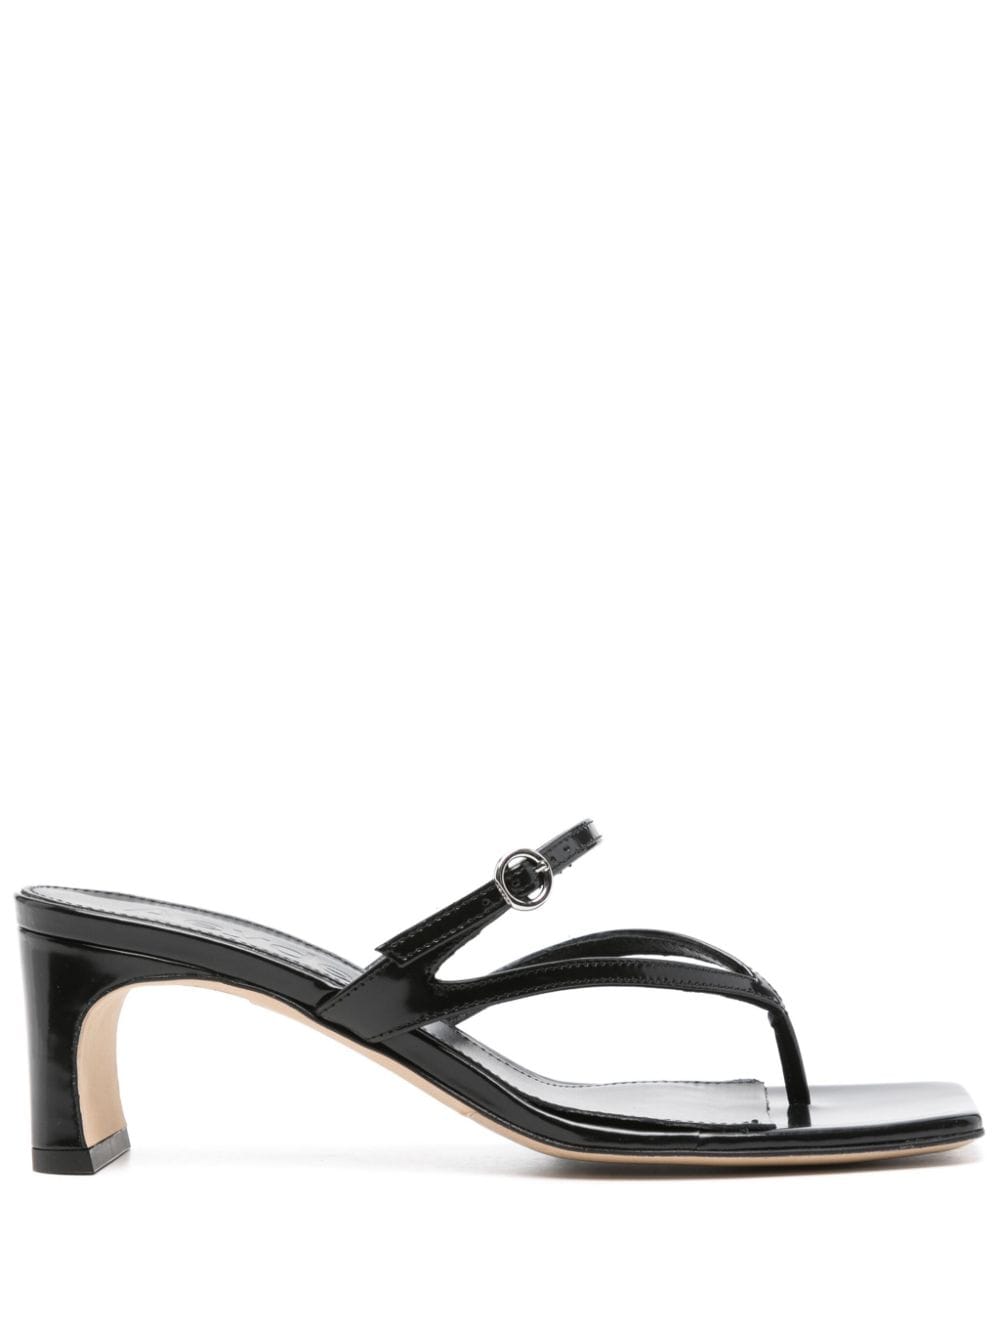 Aeyde Giselle 55mm leather mules - Black von Aeyde